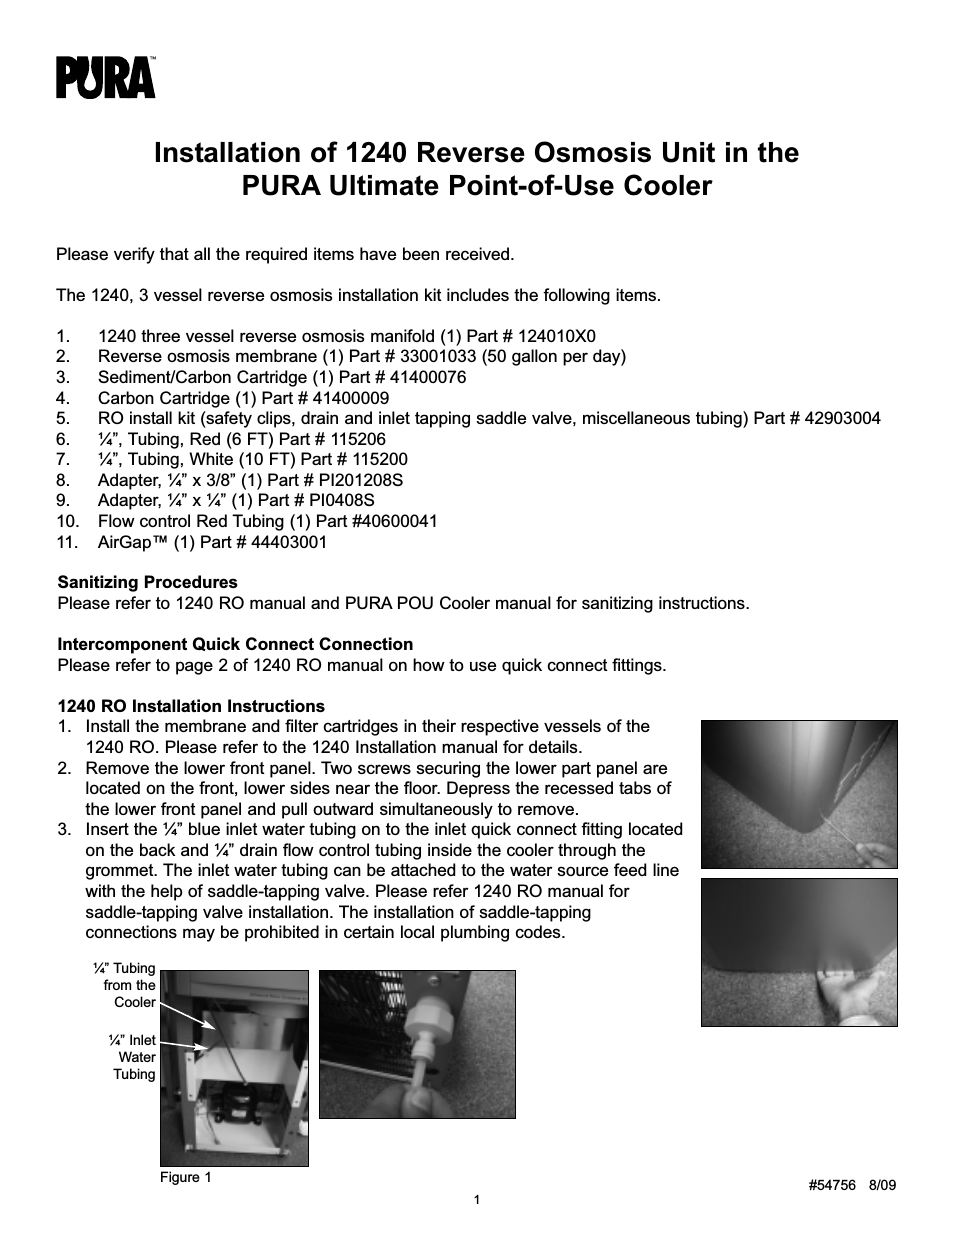 PURA Ultimate Point-of-Use Cooler 1240 Reverse Osmosis Unit Installation Manual